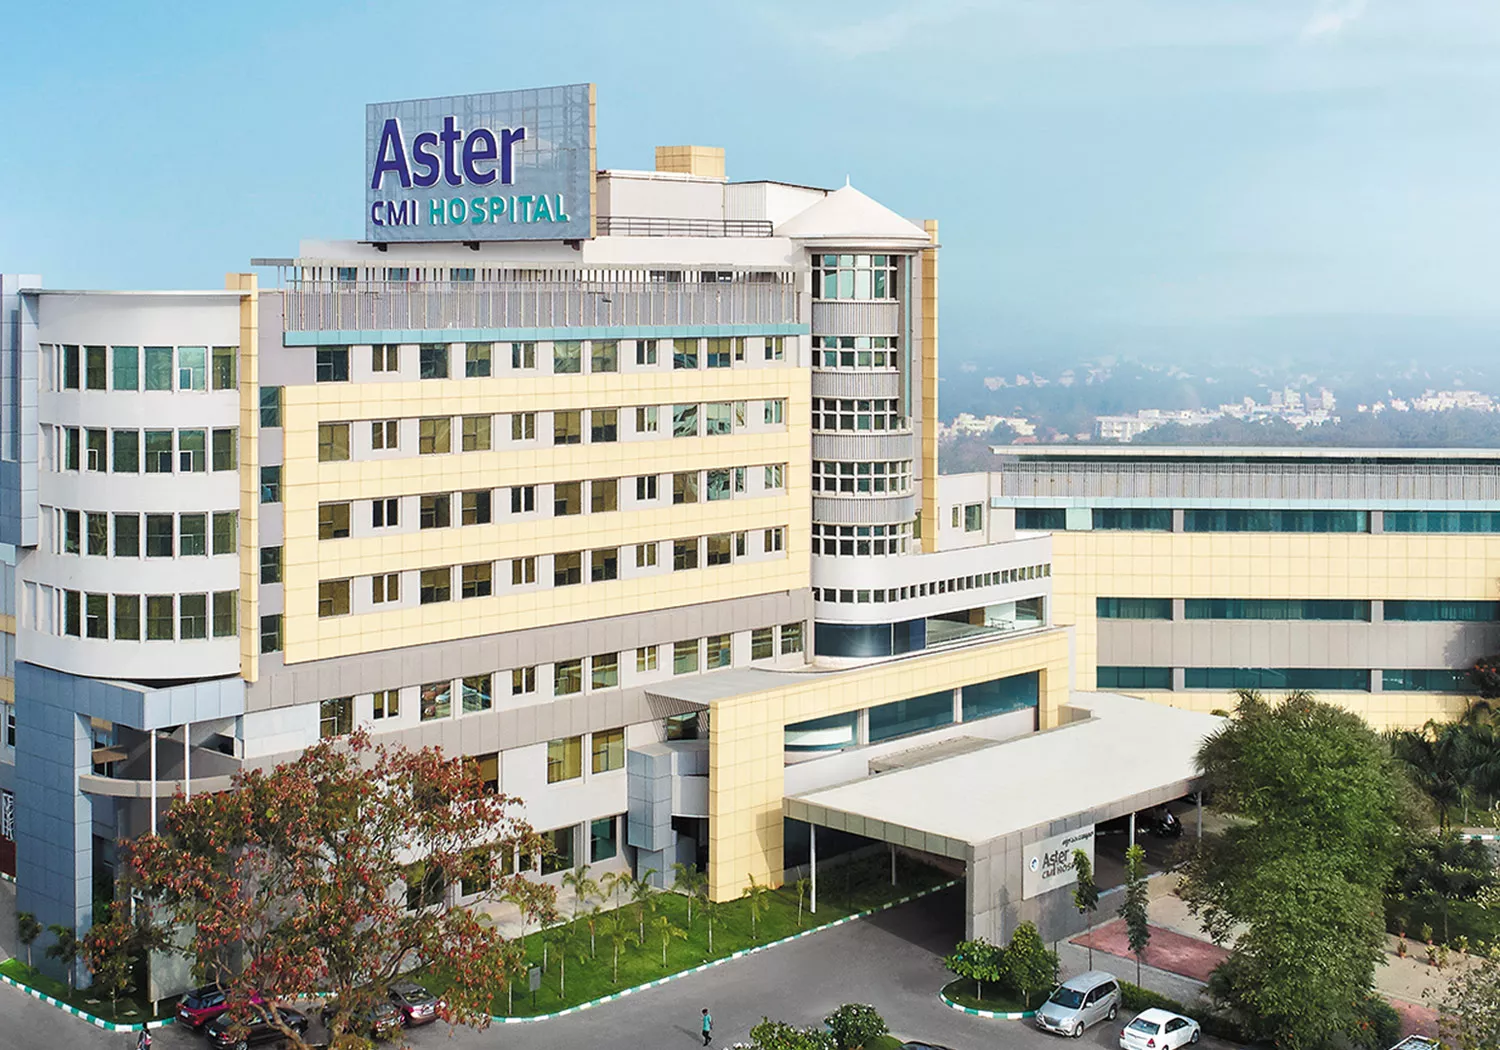 Best Hospital in Bangalore - Aster CMI